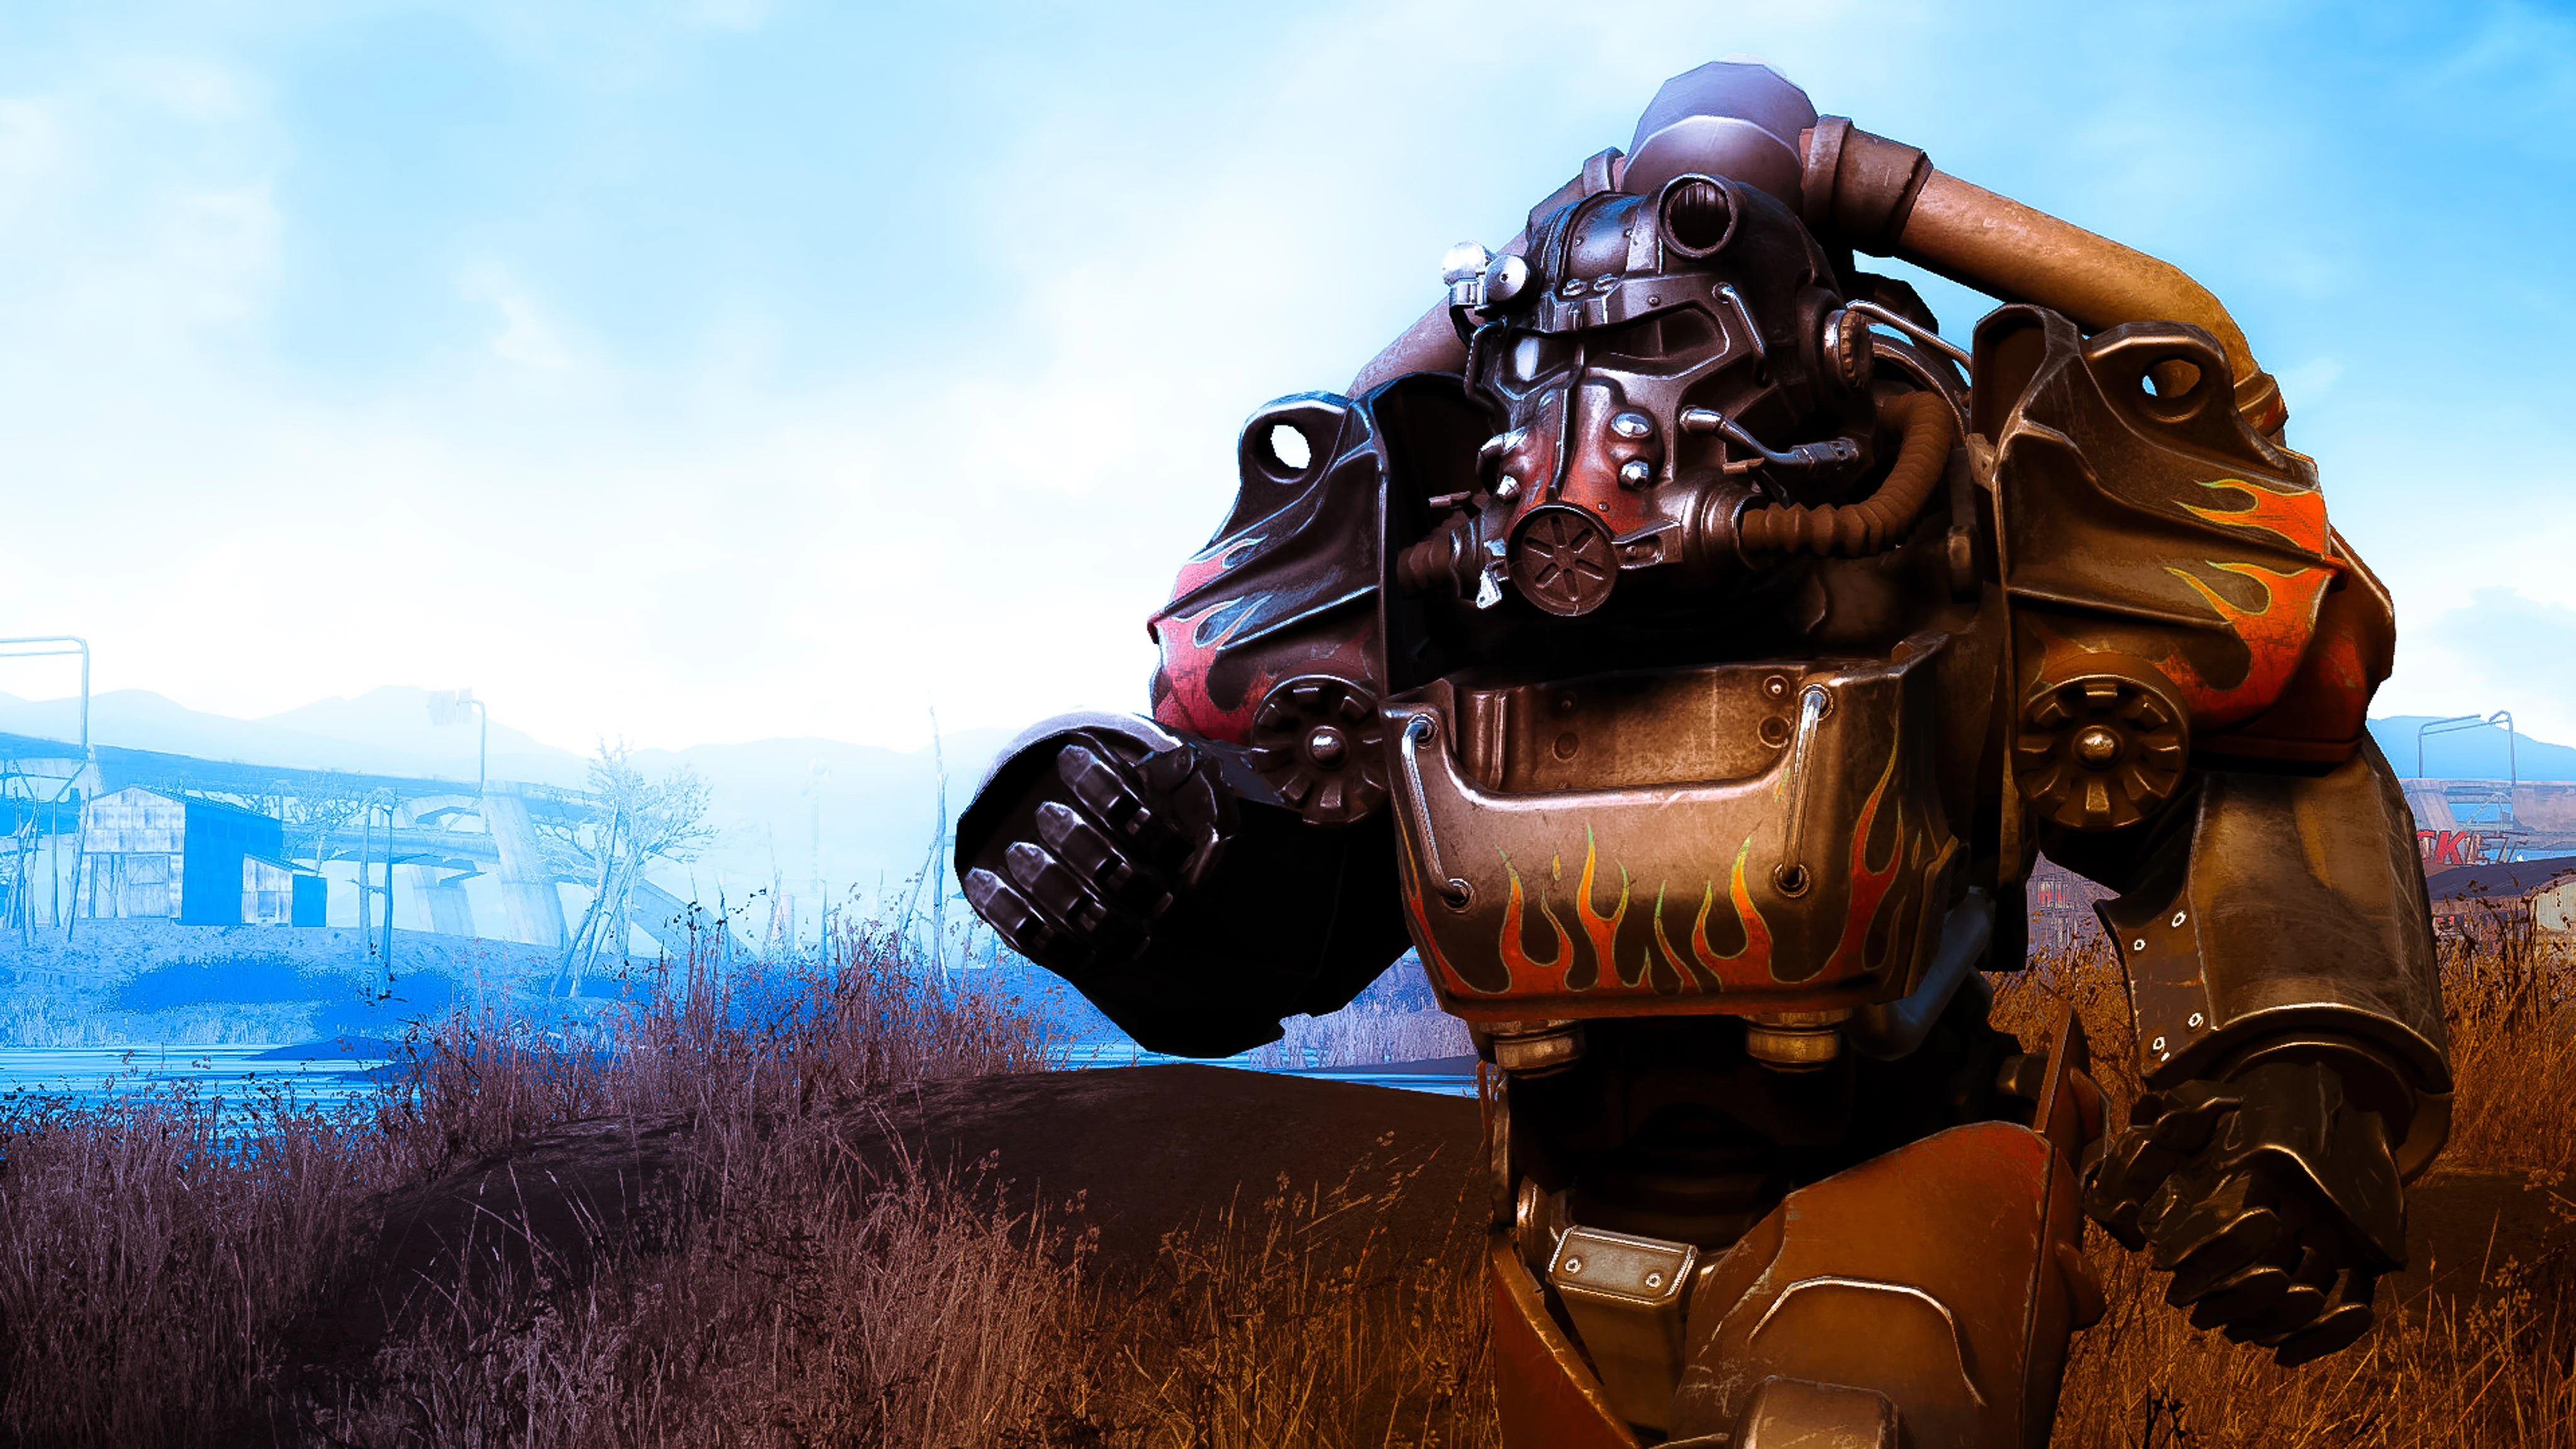 Atom Cats Powerful Badass Armor At Fallout 4 Nexus Mods And Community